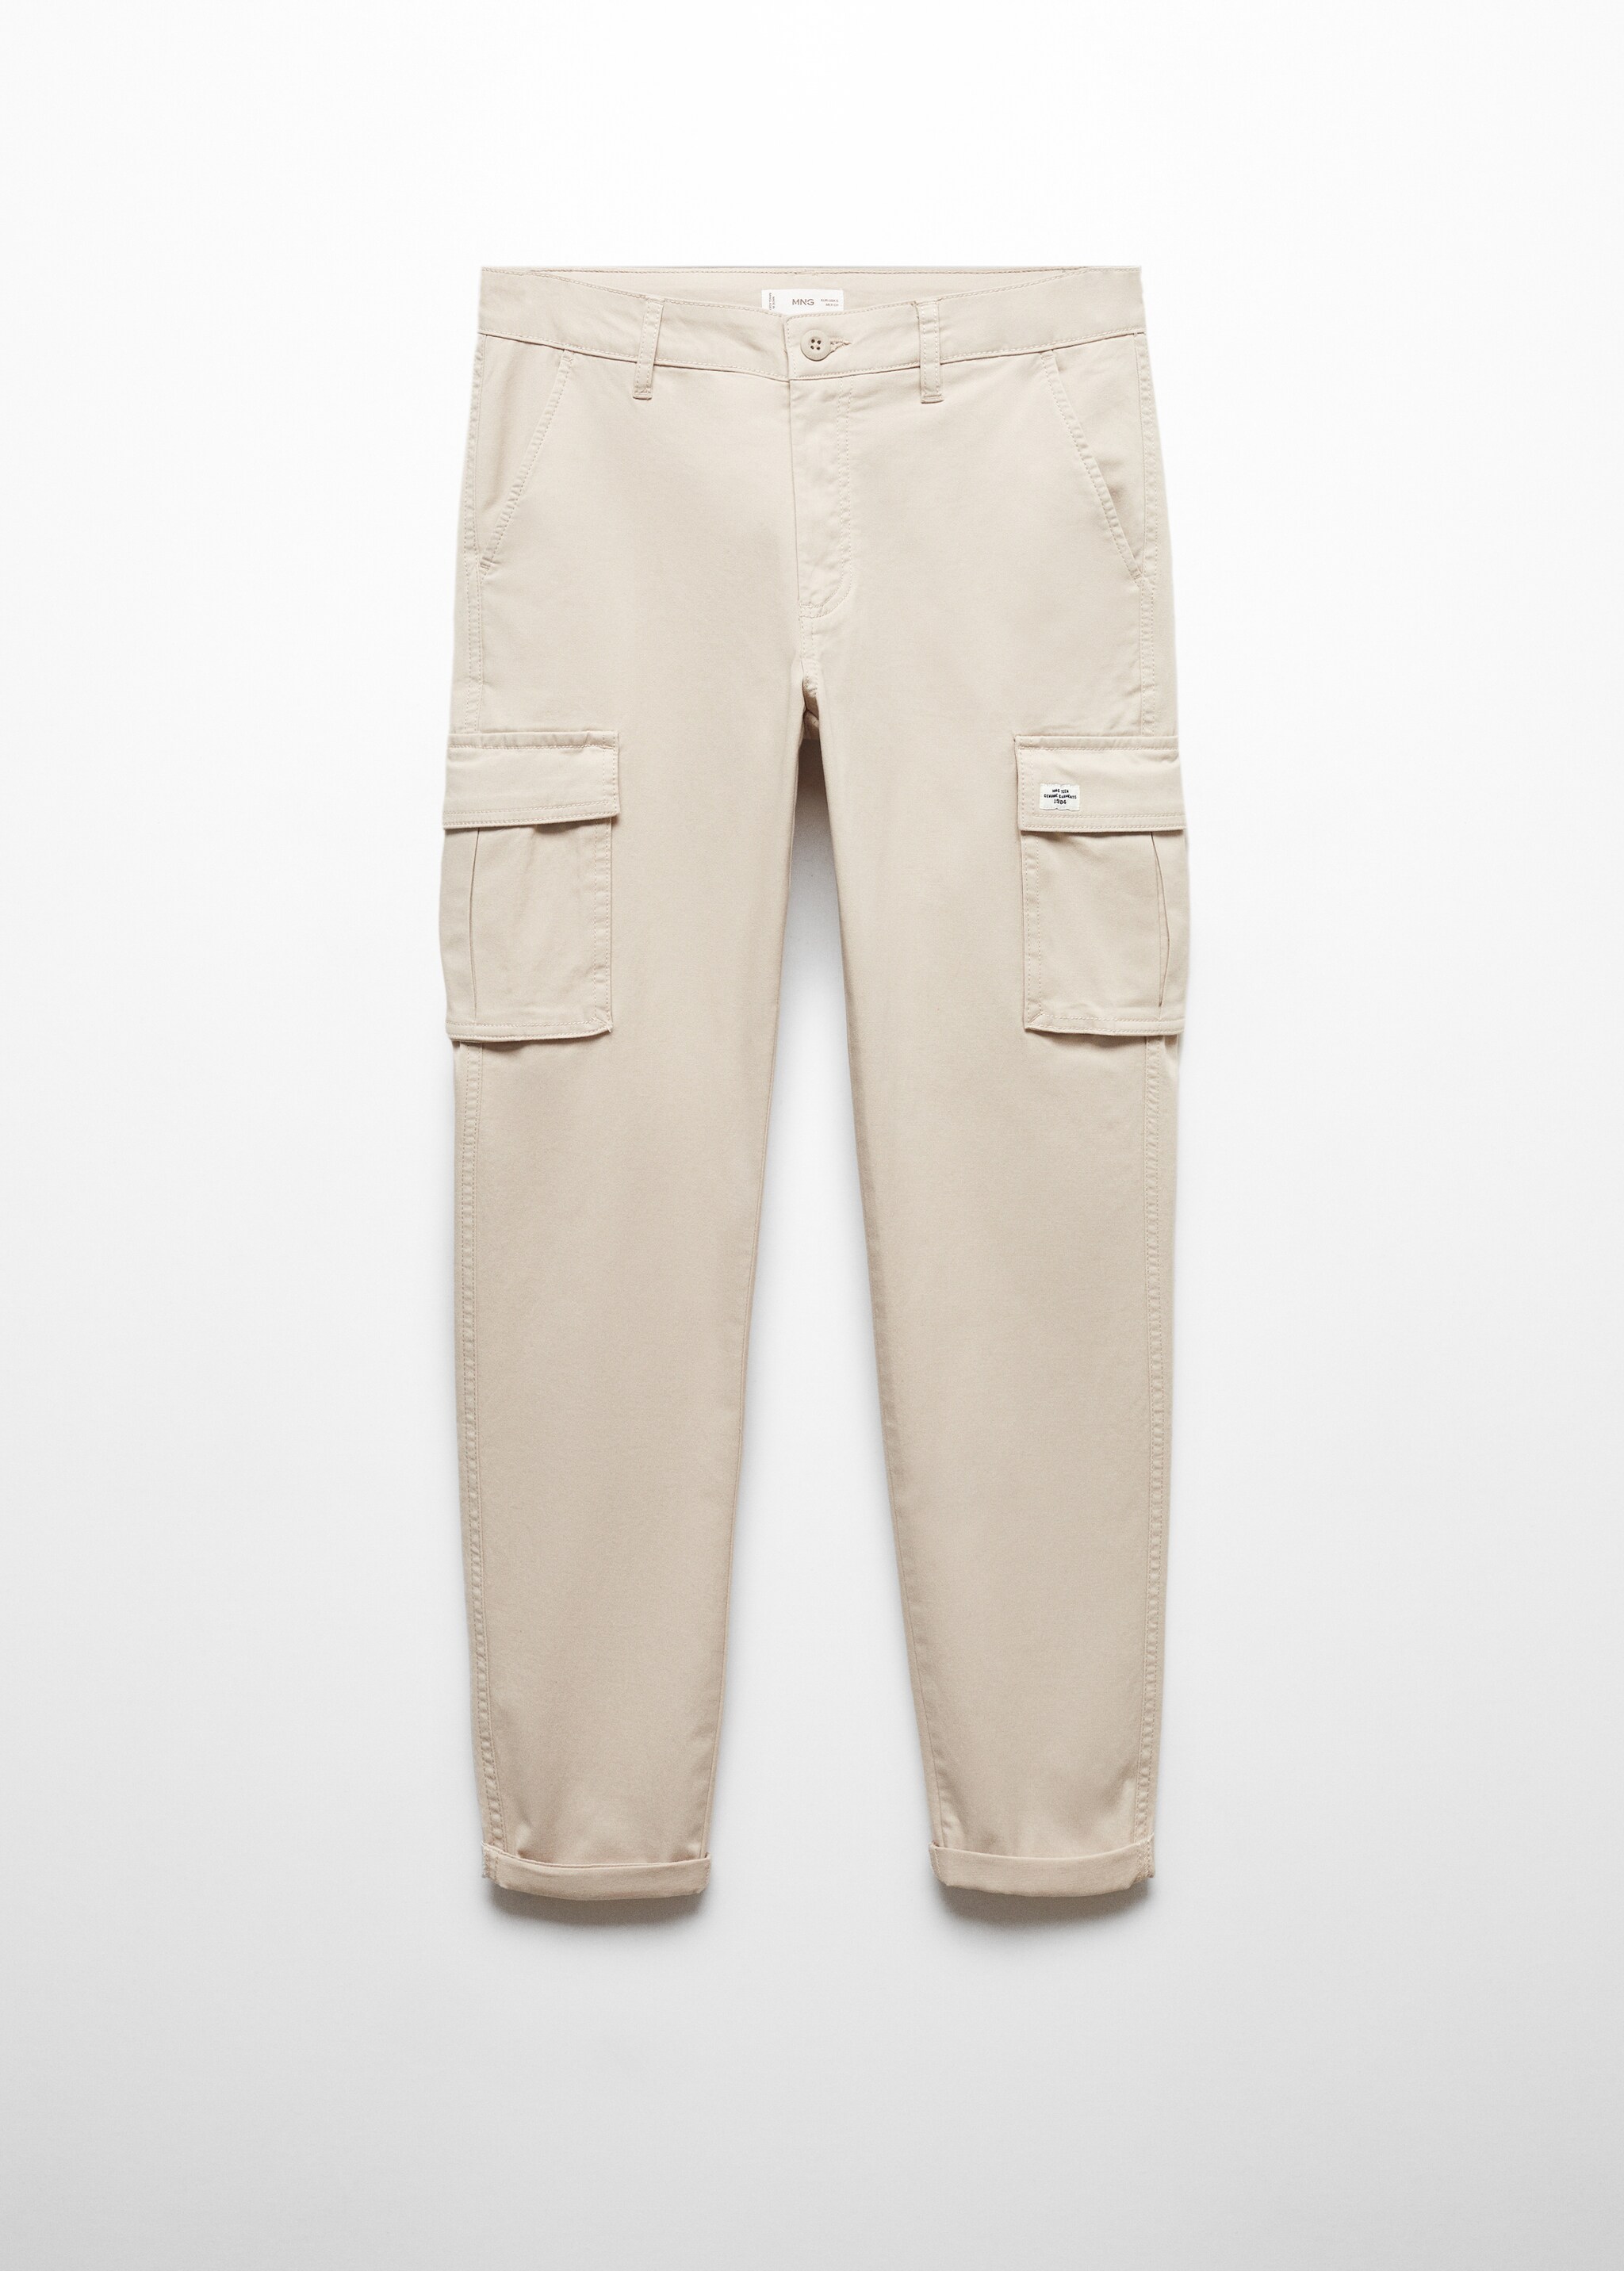 Cotton cargo trousers - Article without model